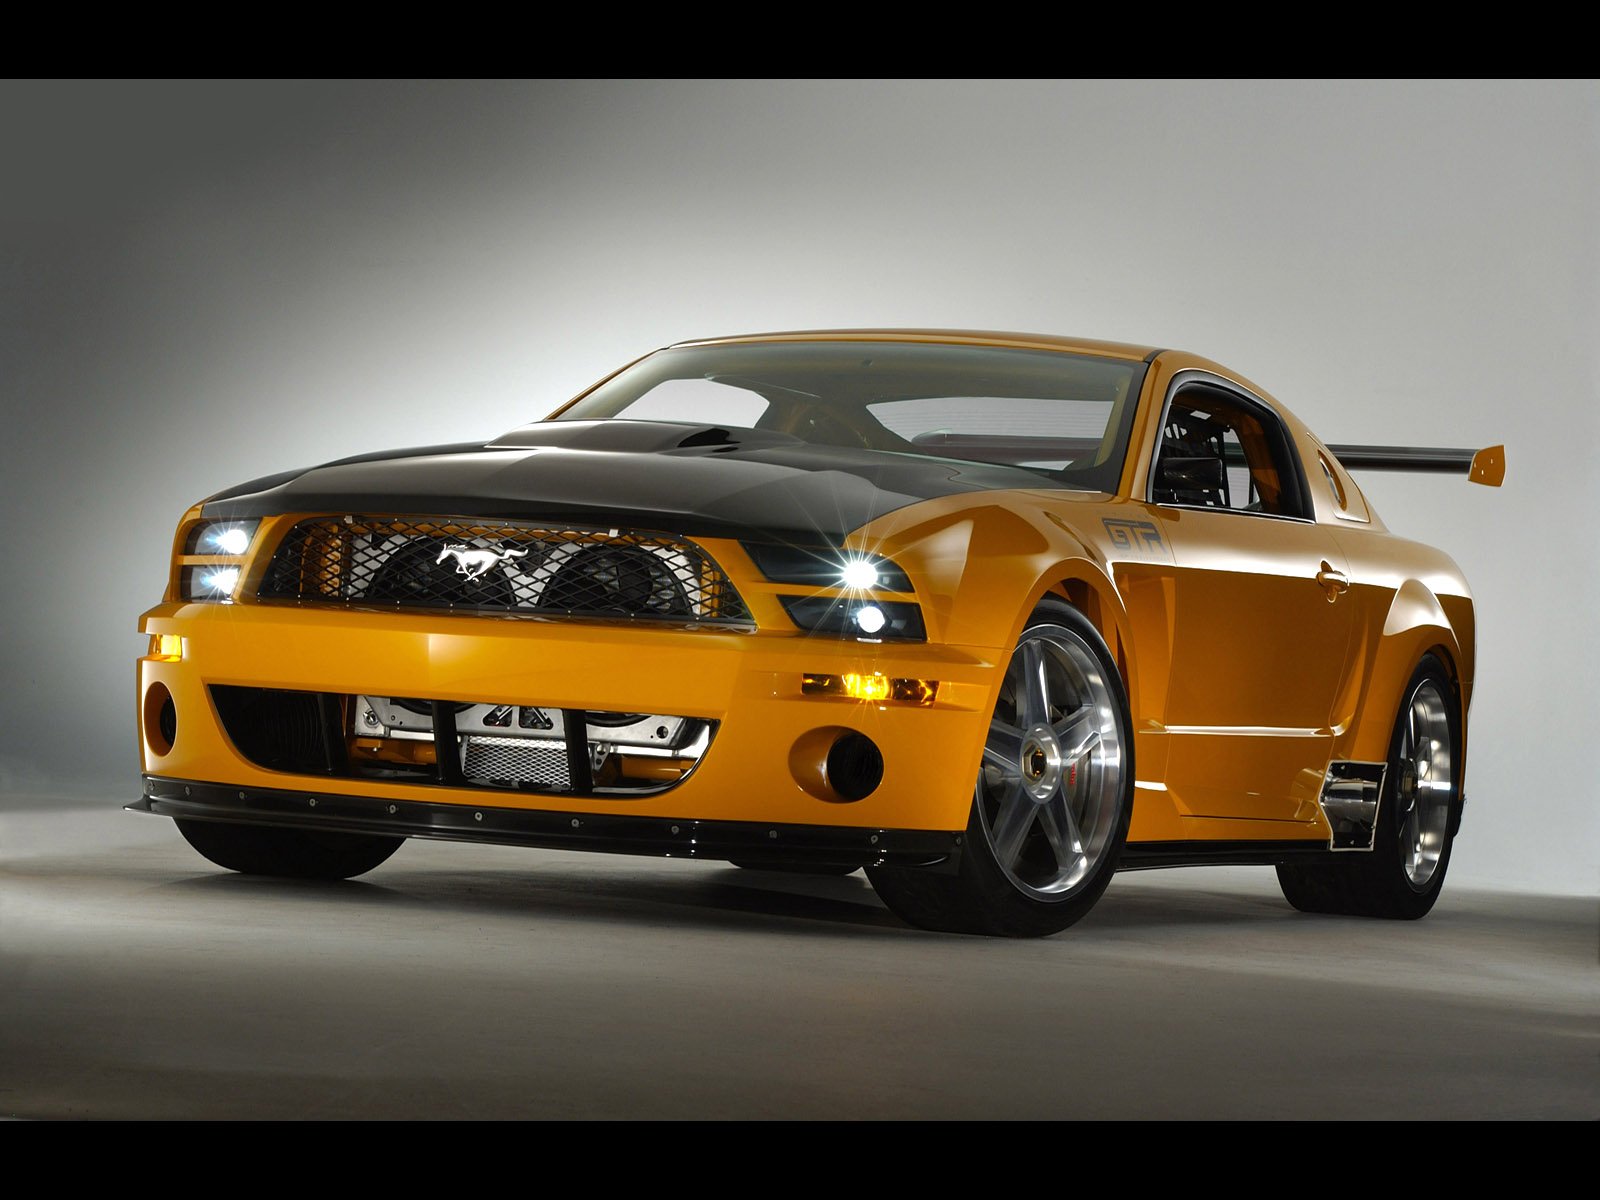 Ford Mustang Gt520 Wallpapers